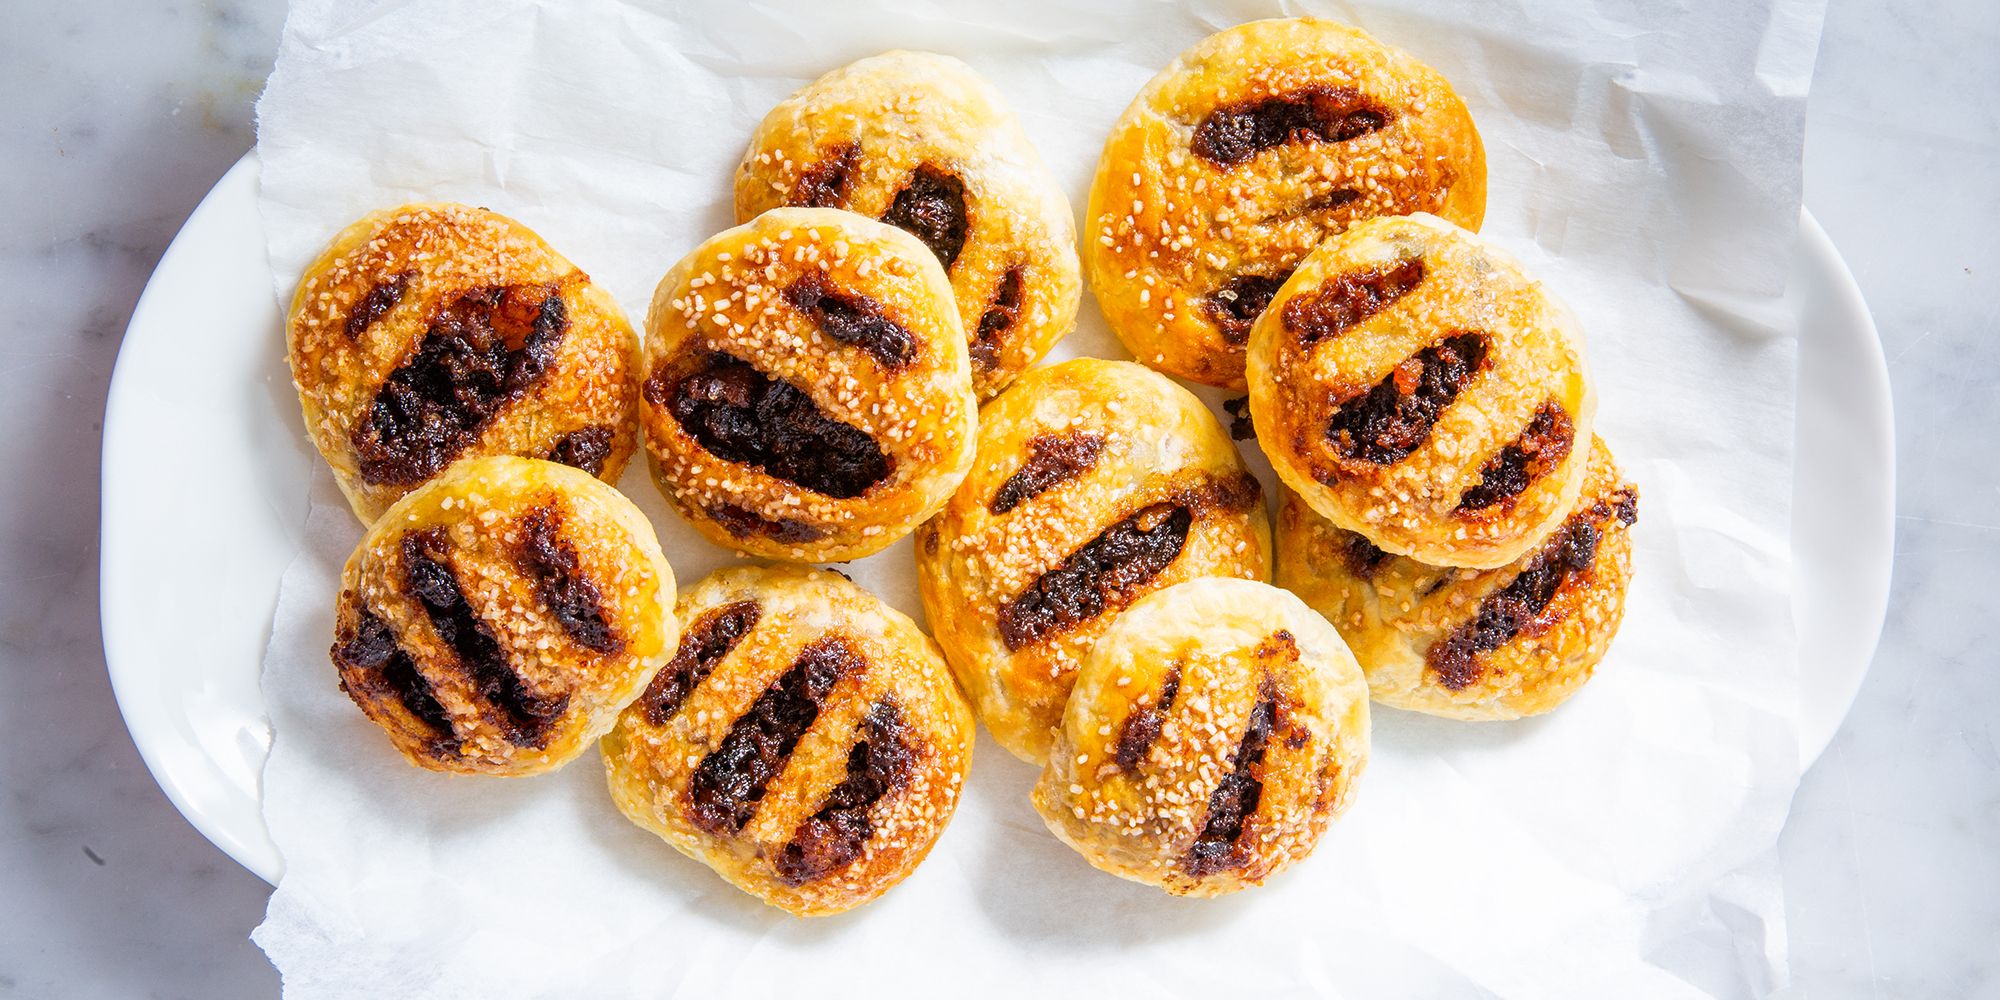 Eccles Cakes with Cinnamon and Nutmeg - Little Sugar Snaps